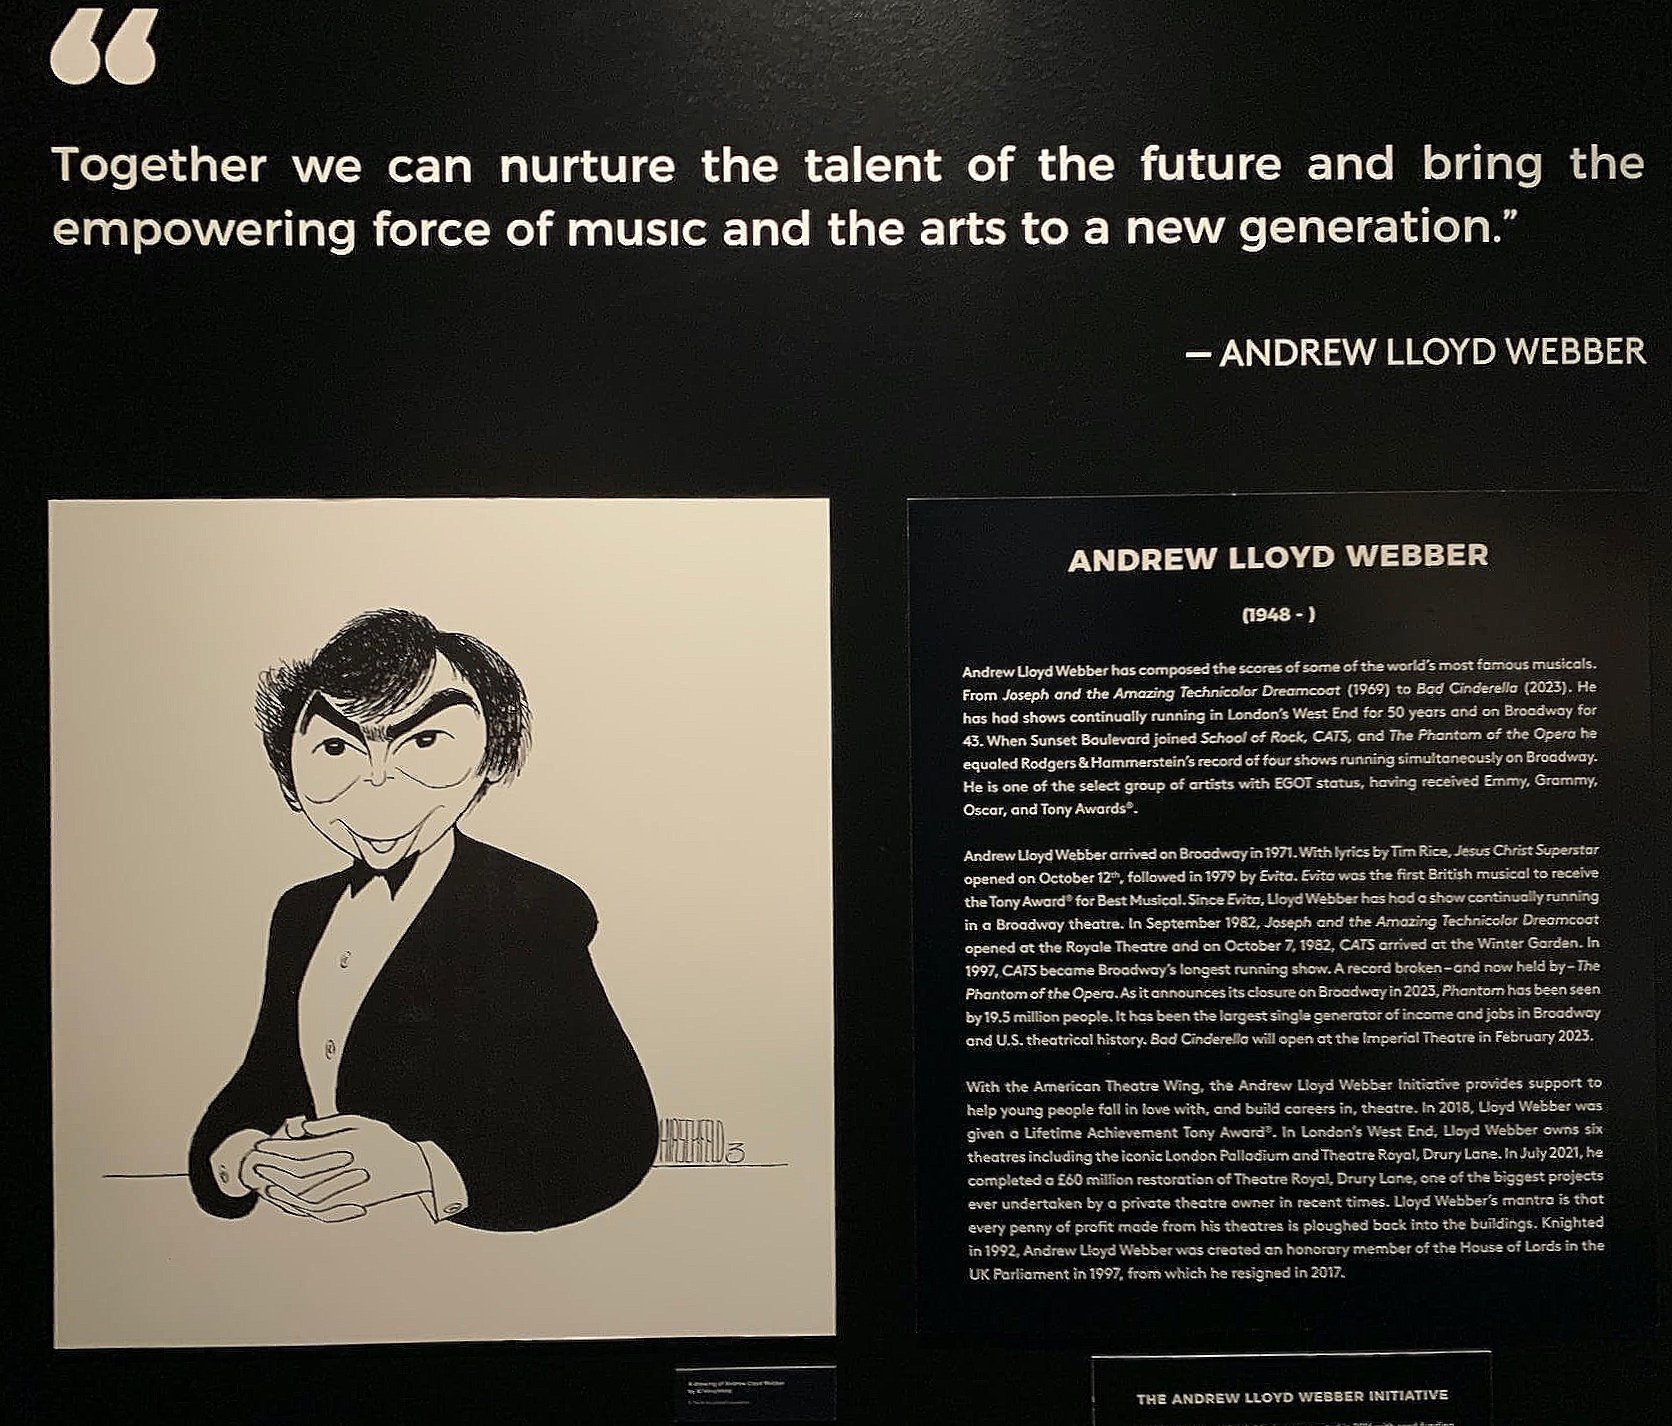  Quote and satirical portrait of Andrew Lloyd Webber 